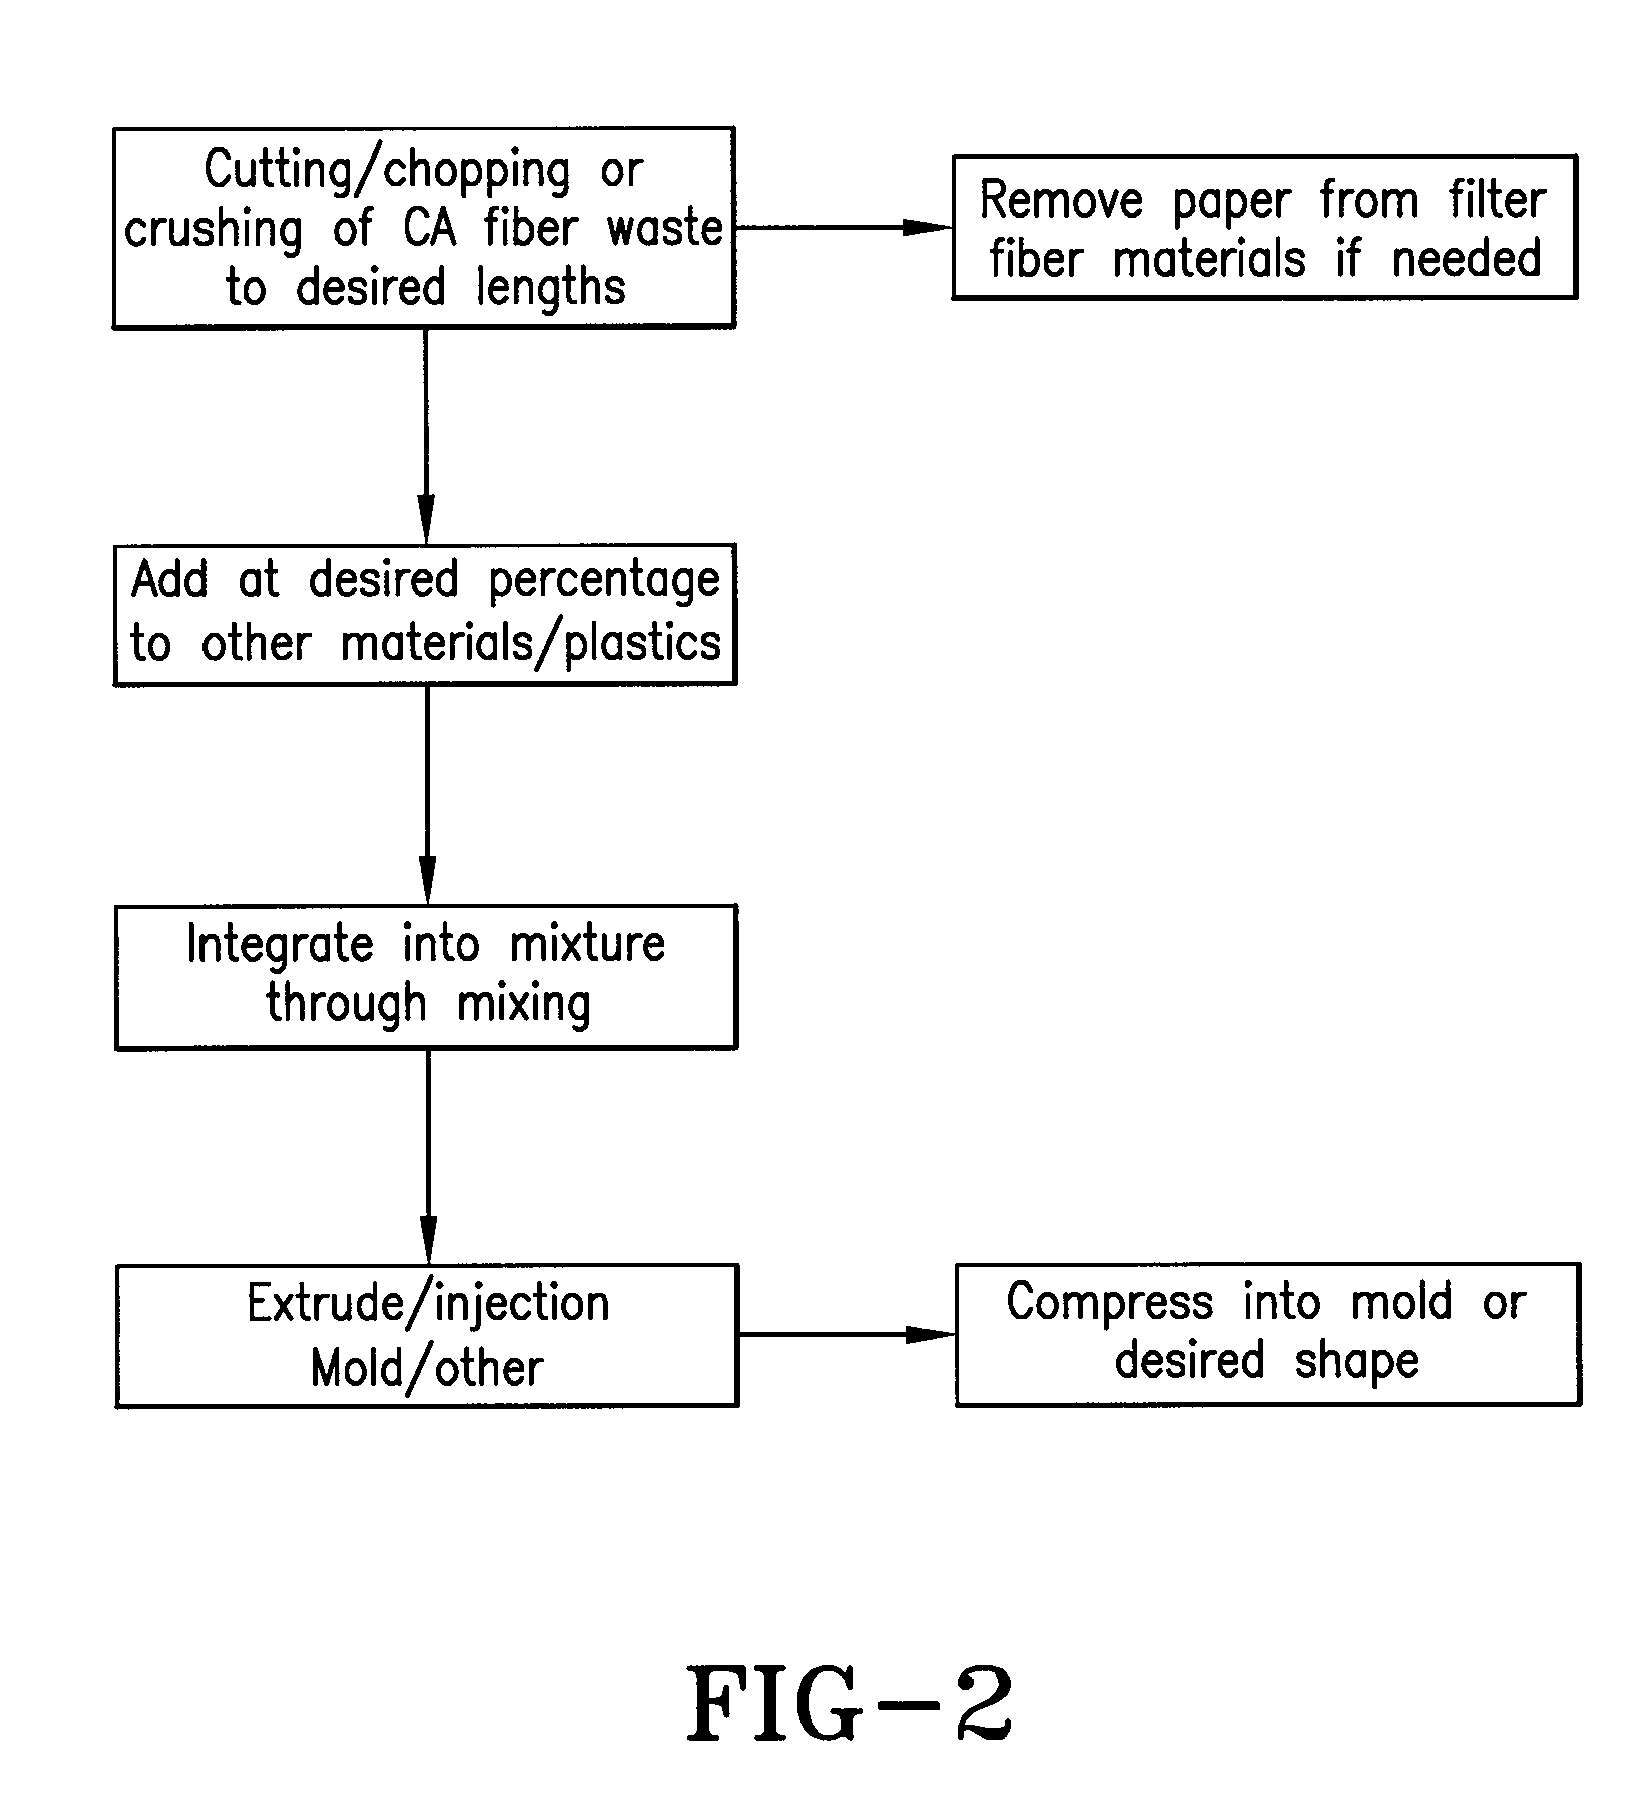 Process and Method for Cellulose Acetate Manufacturing Waste Product Recycling